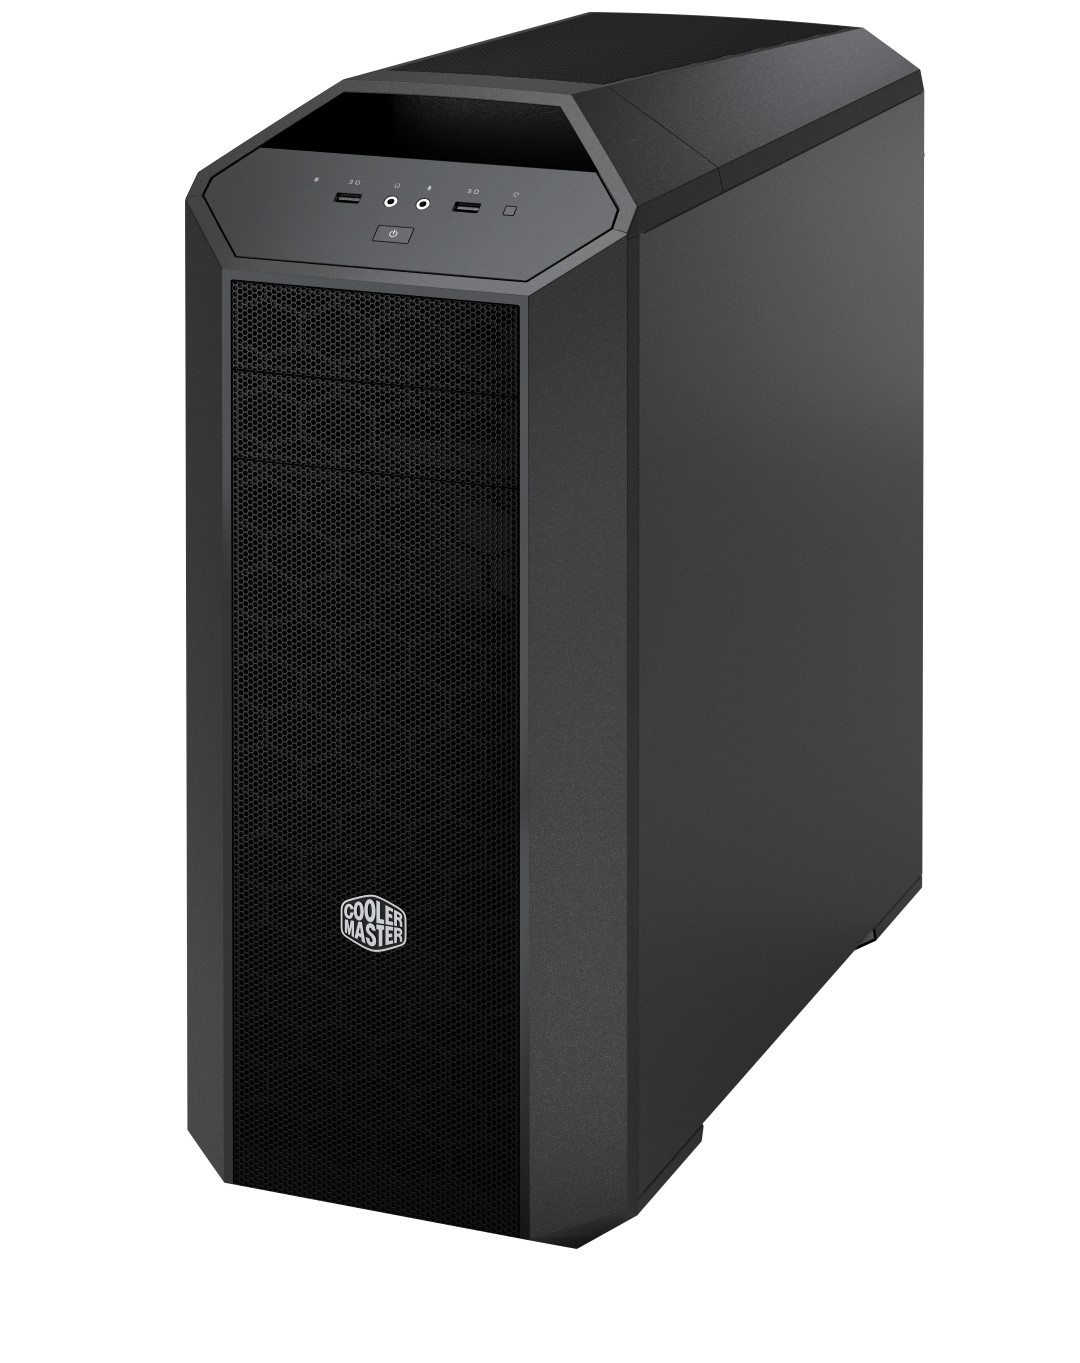 Cooler Master MasterCase 5 available on this 20th August 20